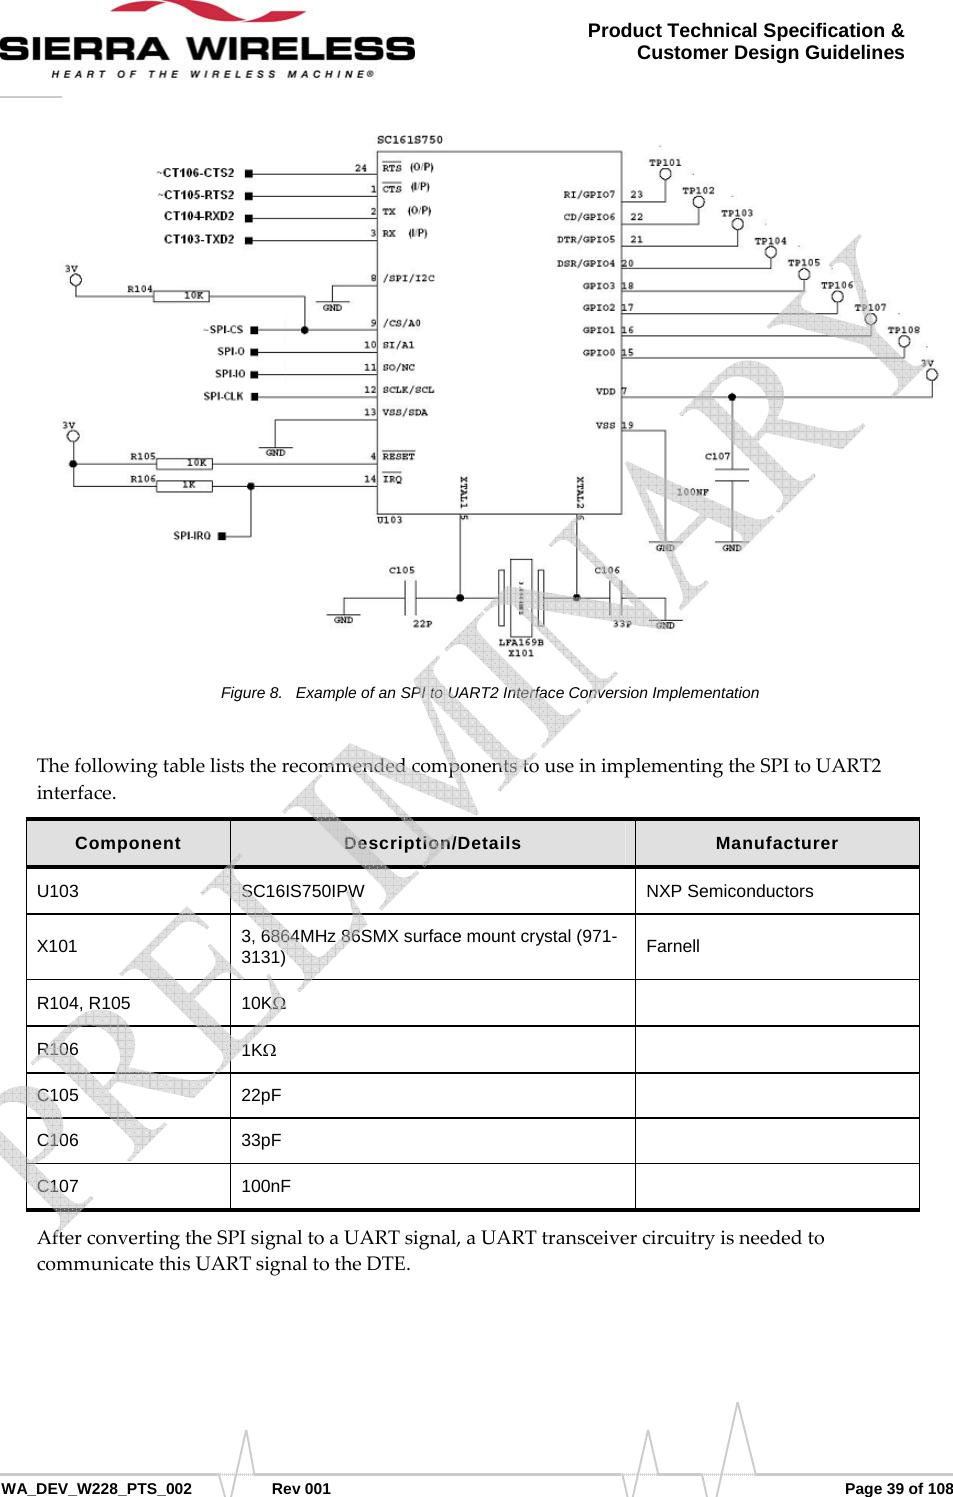      WA_DEV_W228_PTS_002 Rev 001  Page 39 of 108 Product Technical Specification &amp; Customer Design Guidelines Figure 8.  Example of an SPI to UART2 Interface Conversion Implementation ThefollowingtableliststherecommendedcomponentstouseinimplementingtheSPItoUART2interface.Component  Description/Details  Manufacturer U103 SC16IS750IPW  NXP Semiconductors X101  3, 6864MHz 86SMX surface mount crystal (971-3131)  Farnell R104, R105  10KΩ  R106  1KΩ  C105 22pF   C106 33pF   C107 100nF   AfterconvertingtheSPIsignaltoaUARTsignal,aUARTtransceivercircuitryisneededtocommunicatethisUARTsignaltotheDTE.   